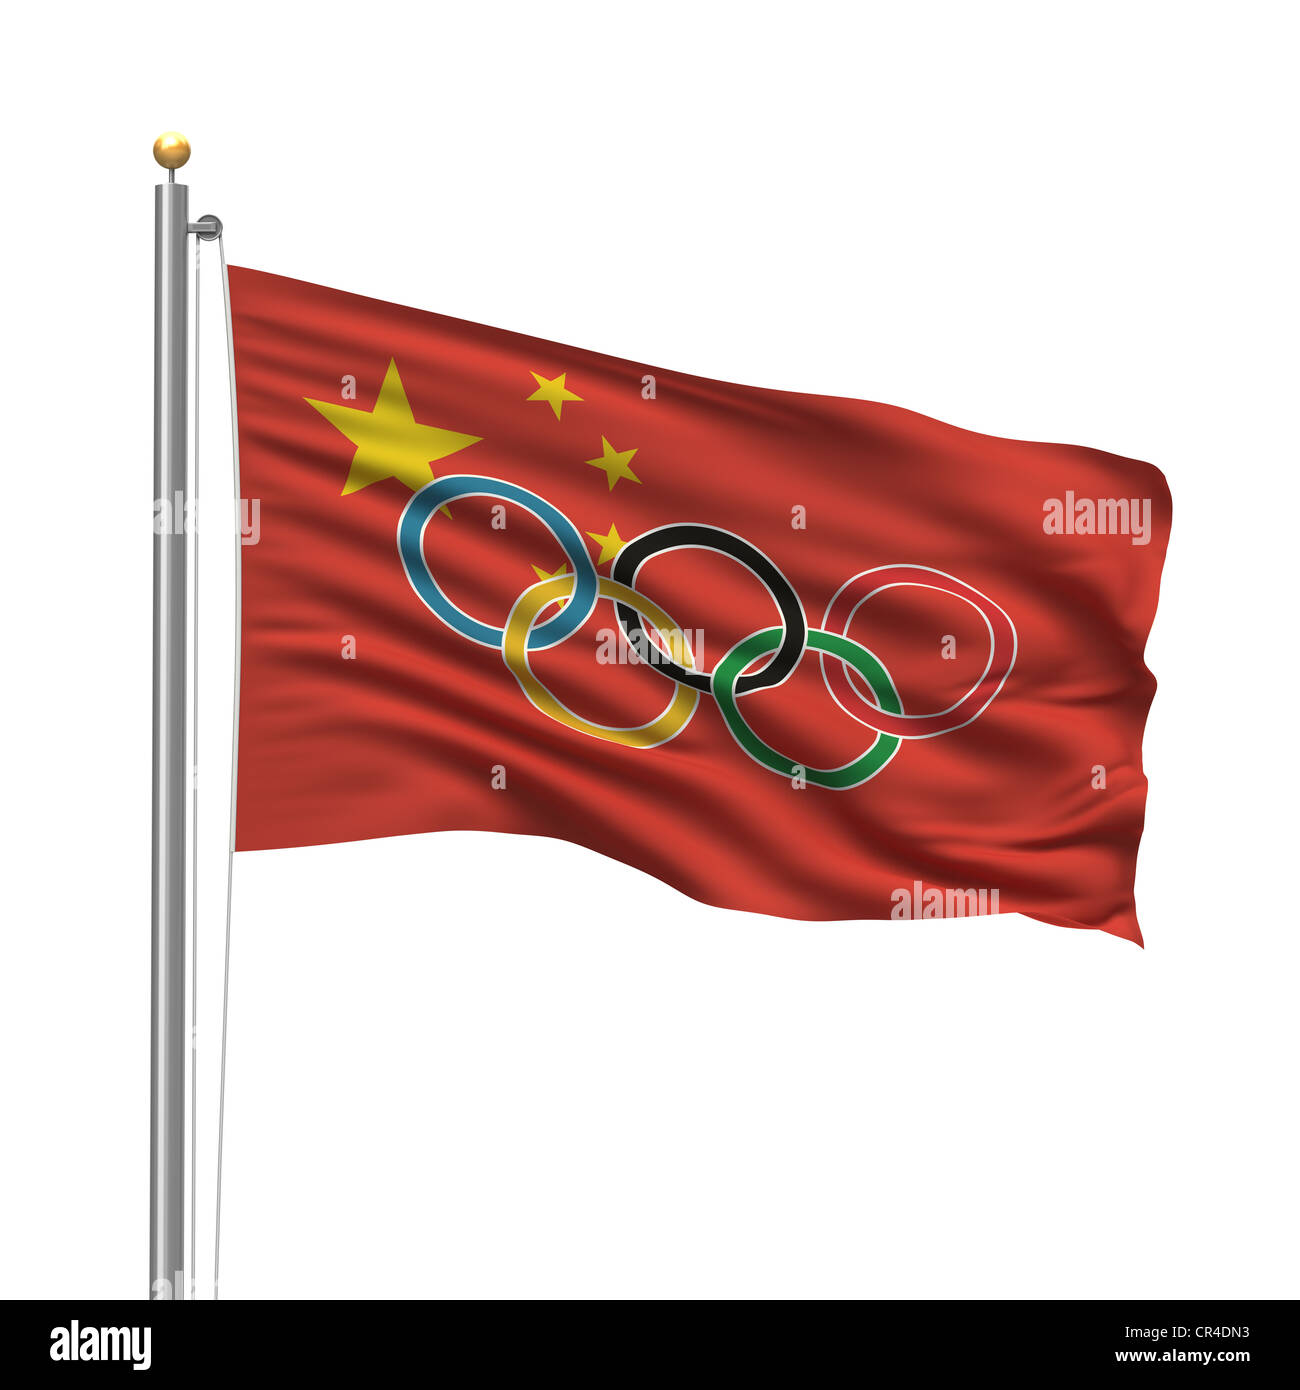 Flag of China with Olympic rings Stock Photo